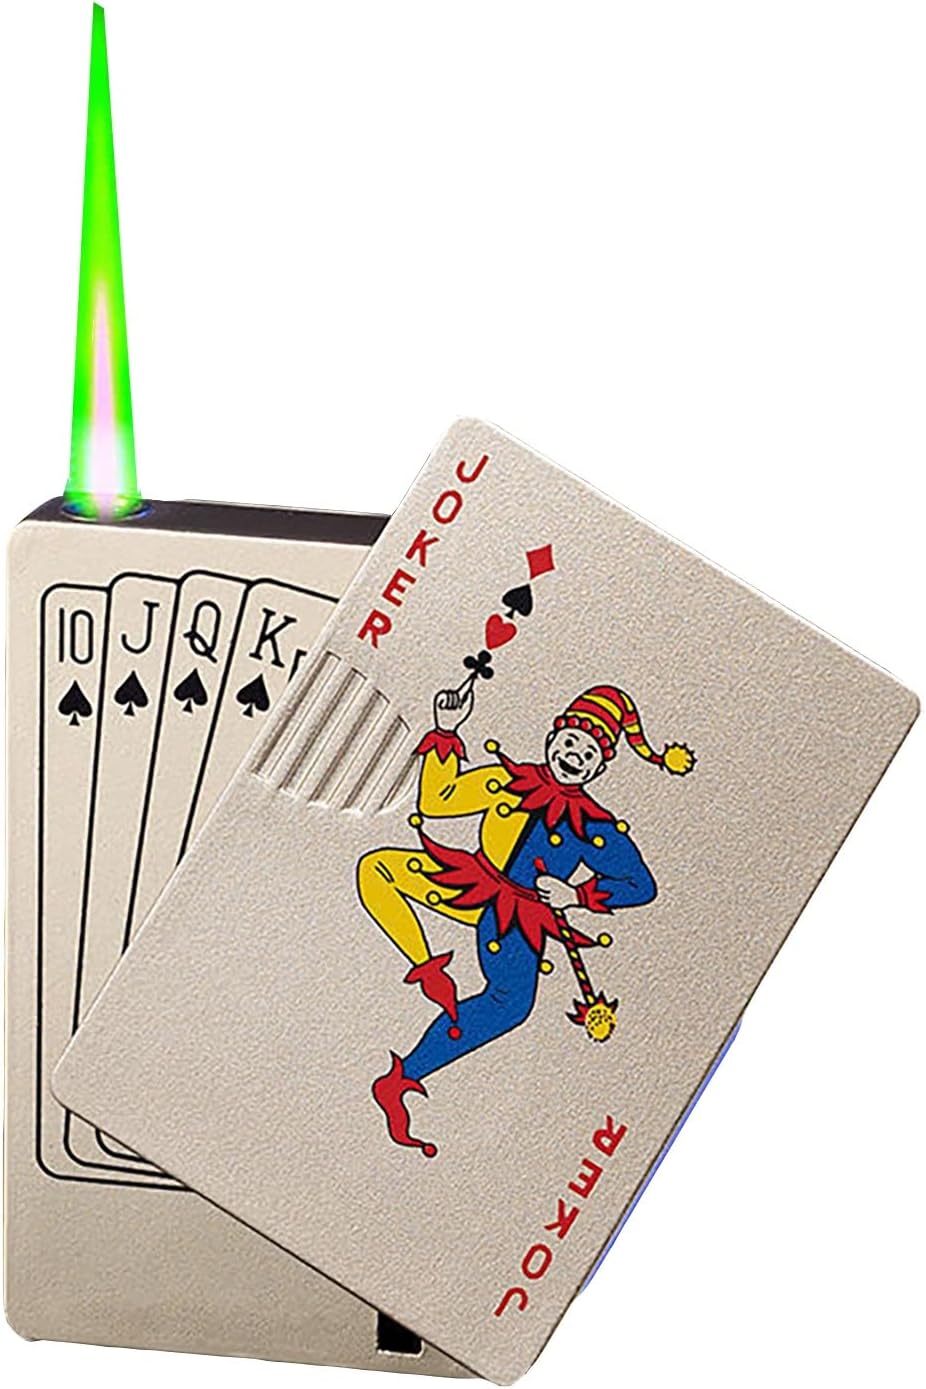 Jet Torch Lighter Windproof Playing Cards Cool Design